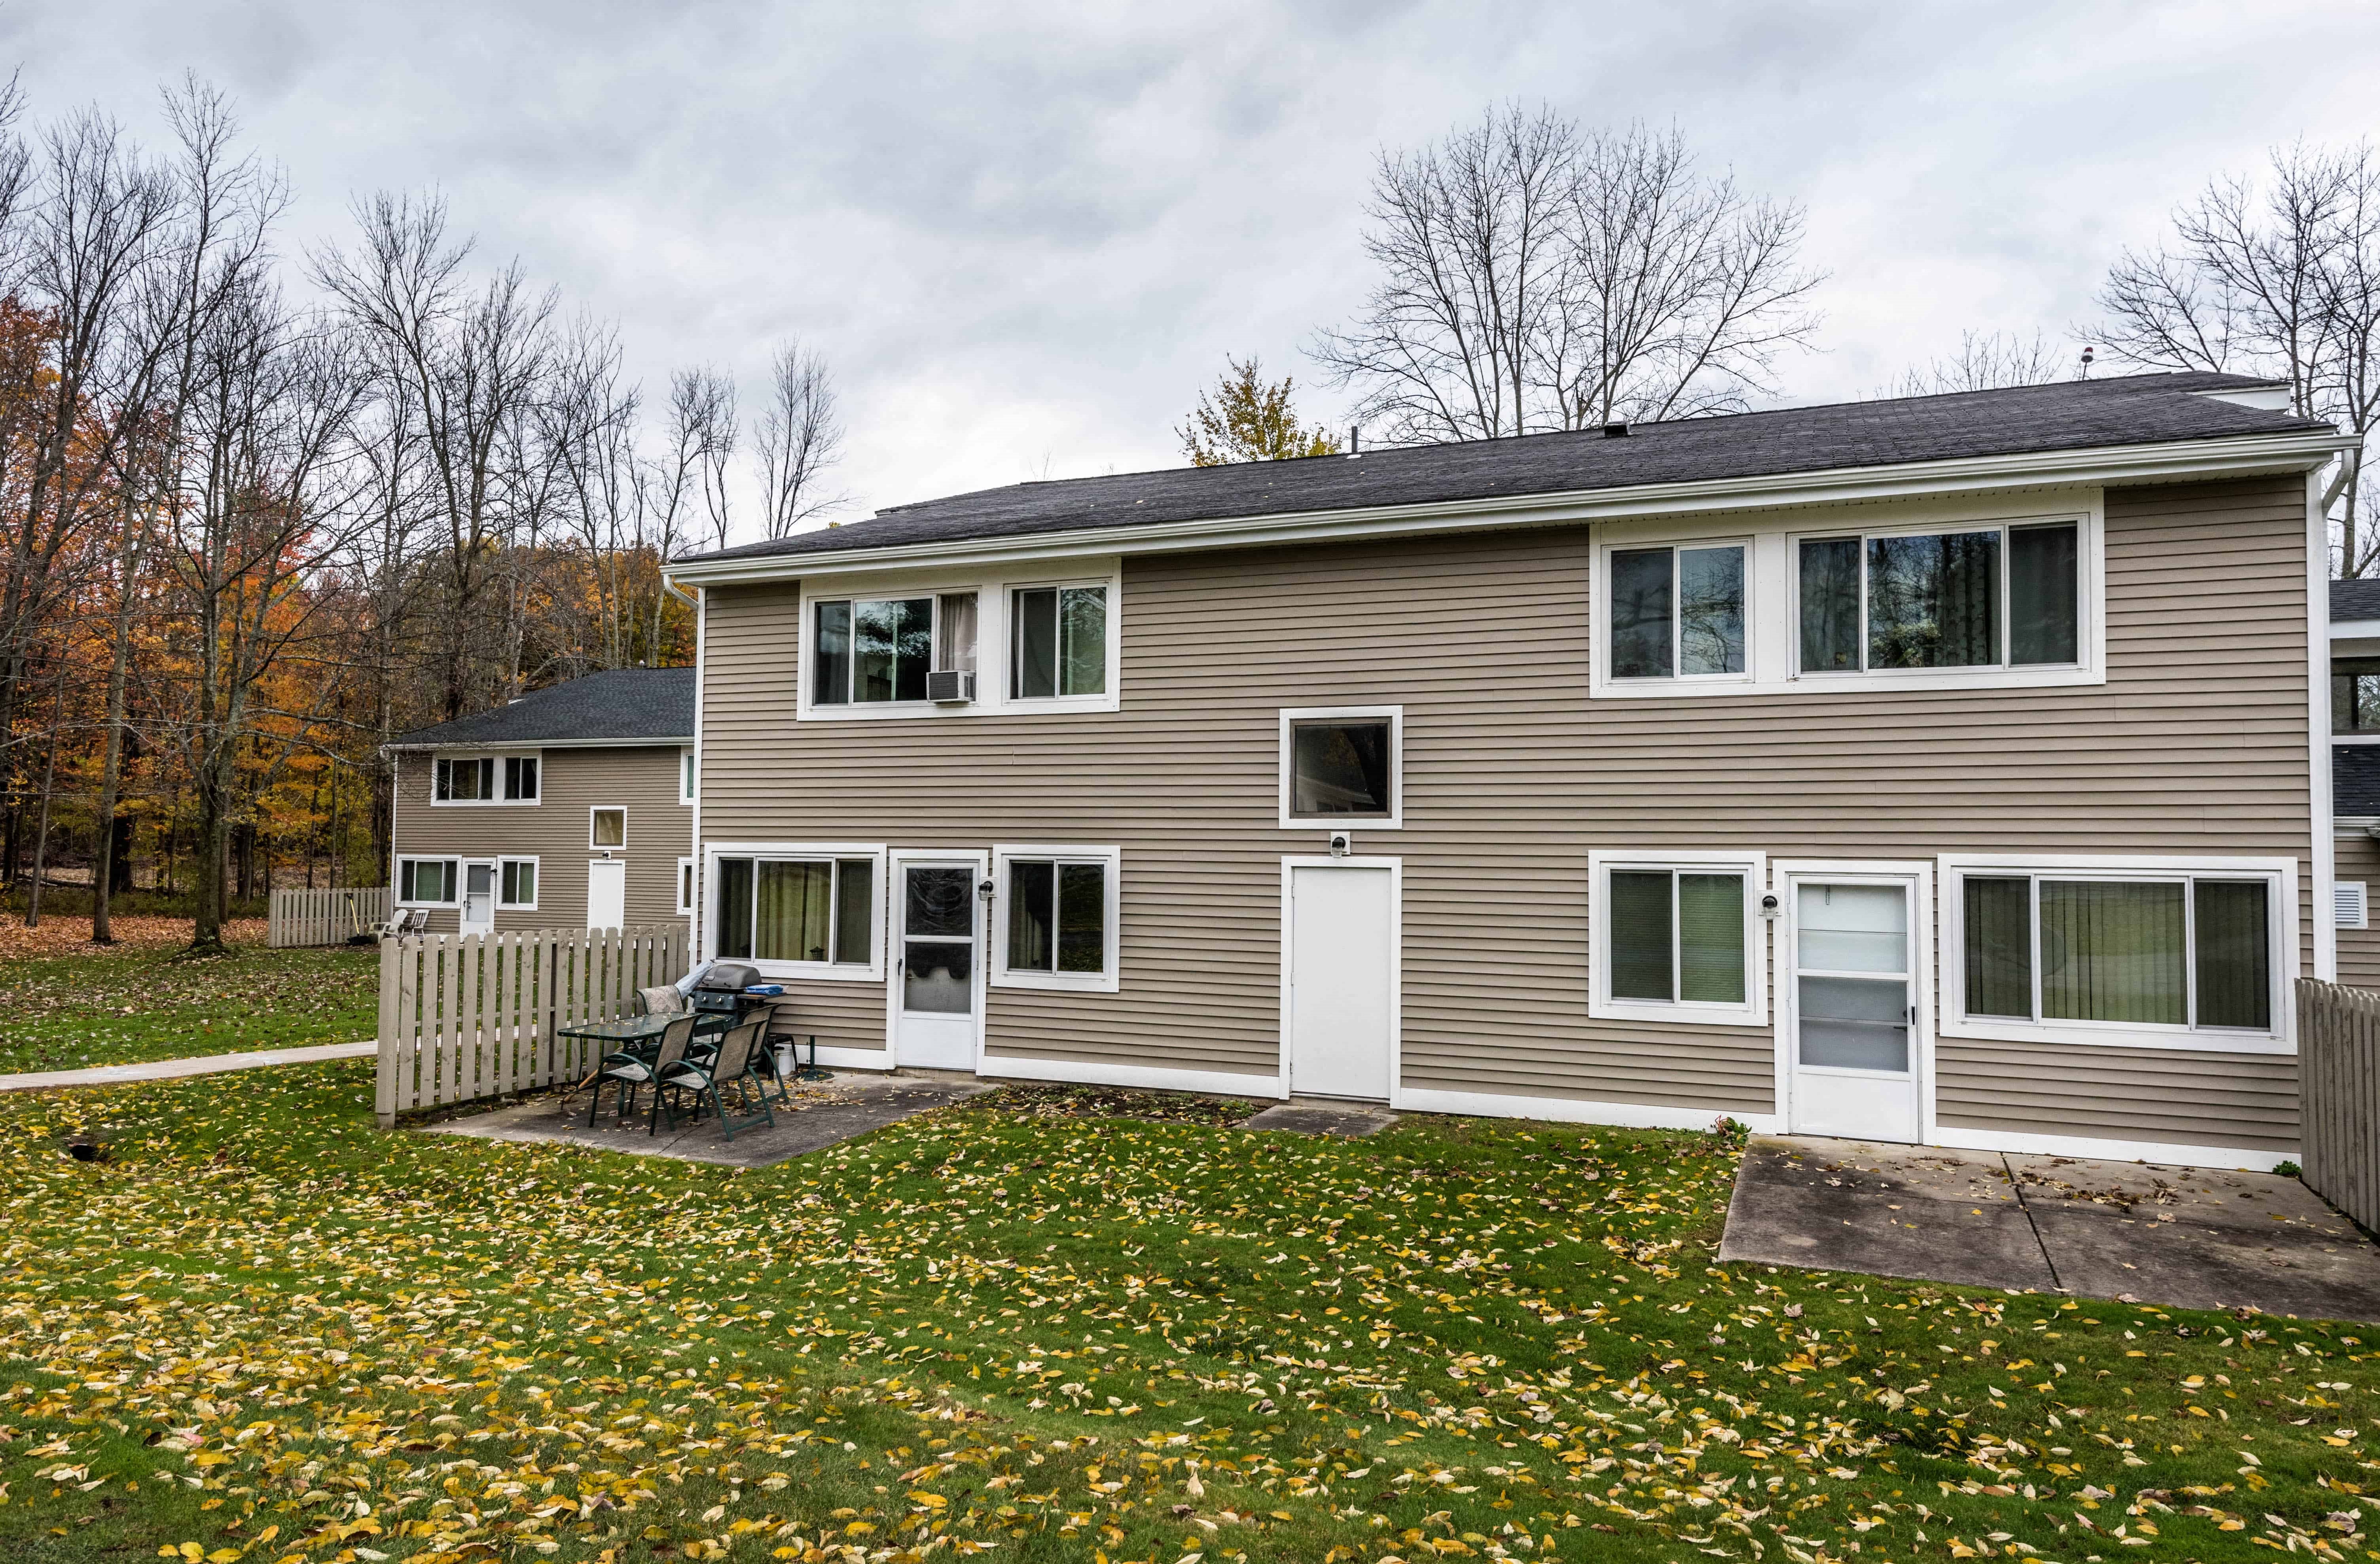 Sundridge Apartments - Two-bedroom, Two-Bath Units - Two-bedroom, One and a half-Bath Units – Amherst, NY – Sweet Home School District - UB North – Heat and Water Included - Appliances Included – Pet